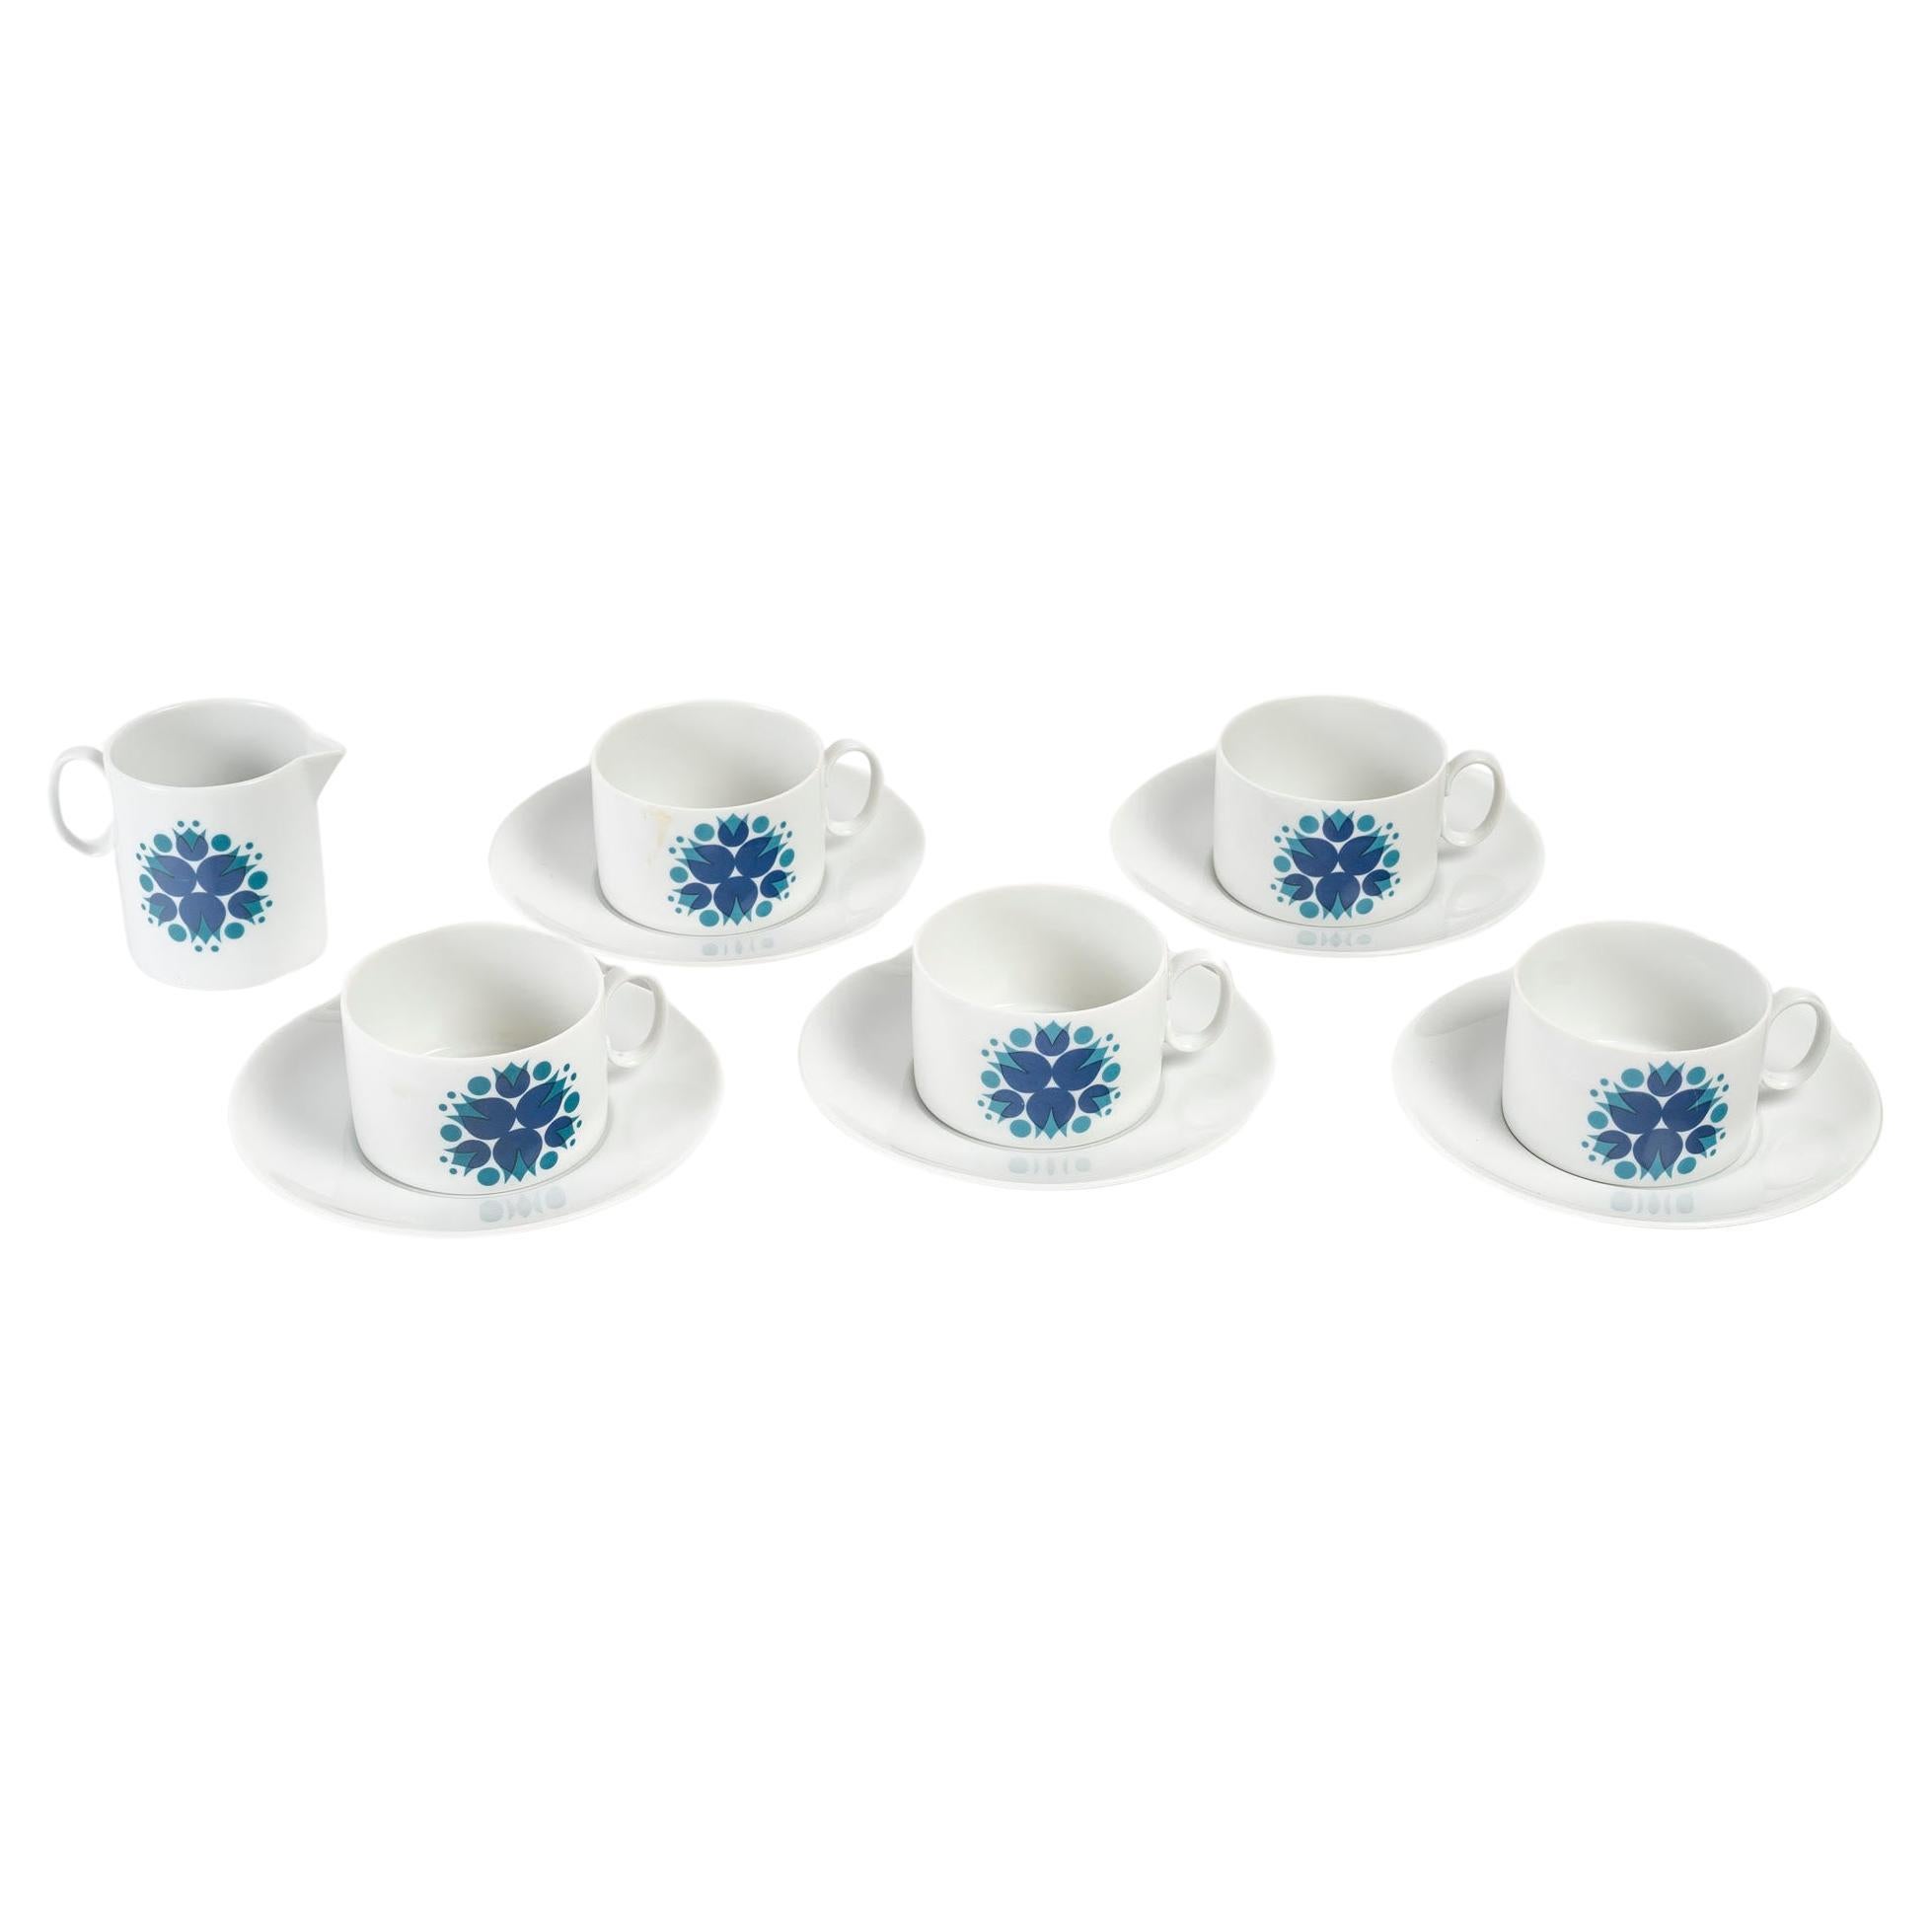 4 Porcelain Cups and Saucers from the 1960s by Maison Thomas.